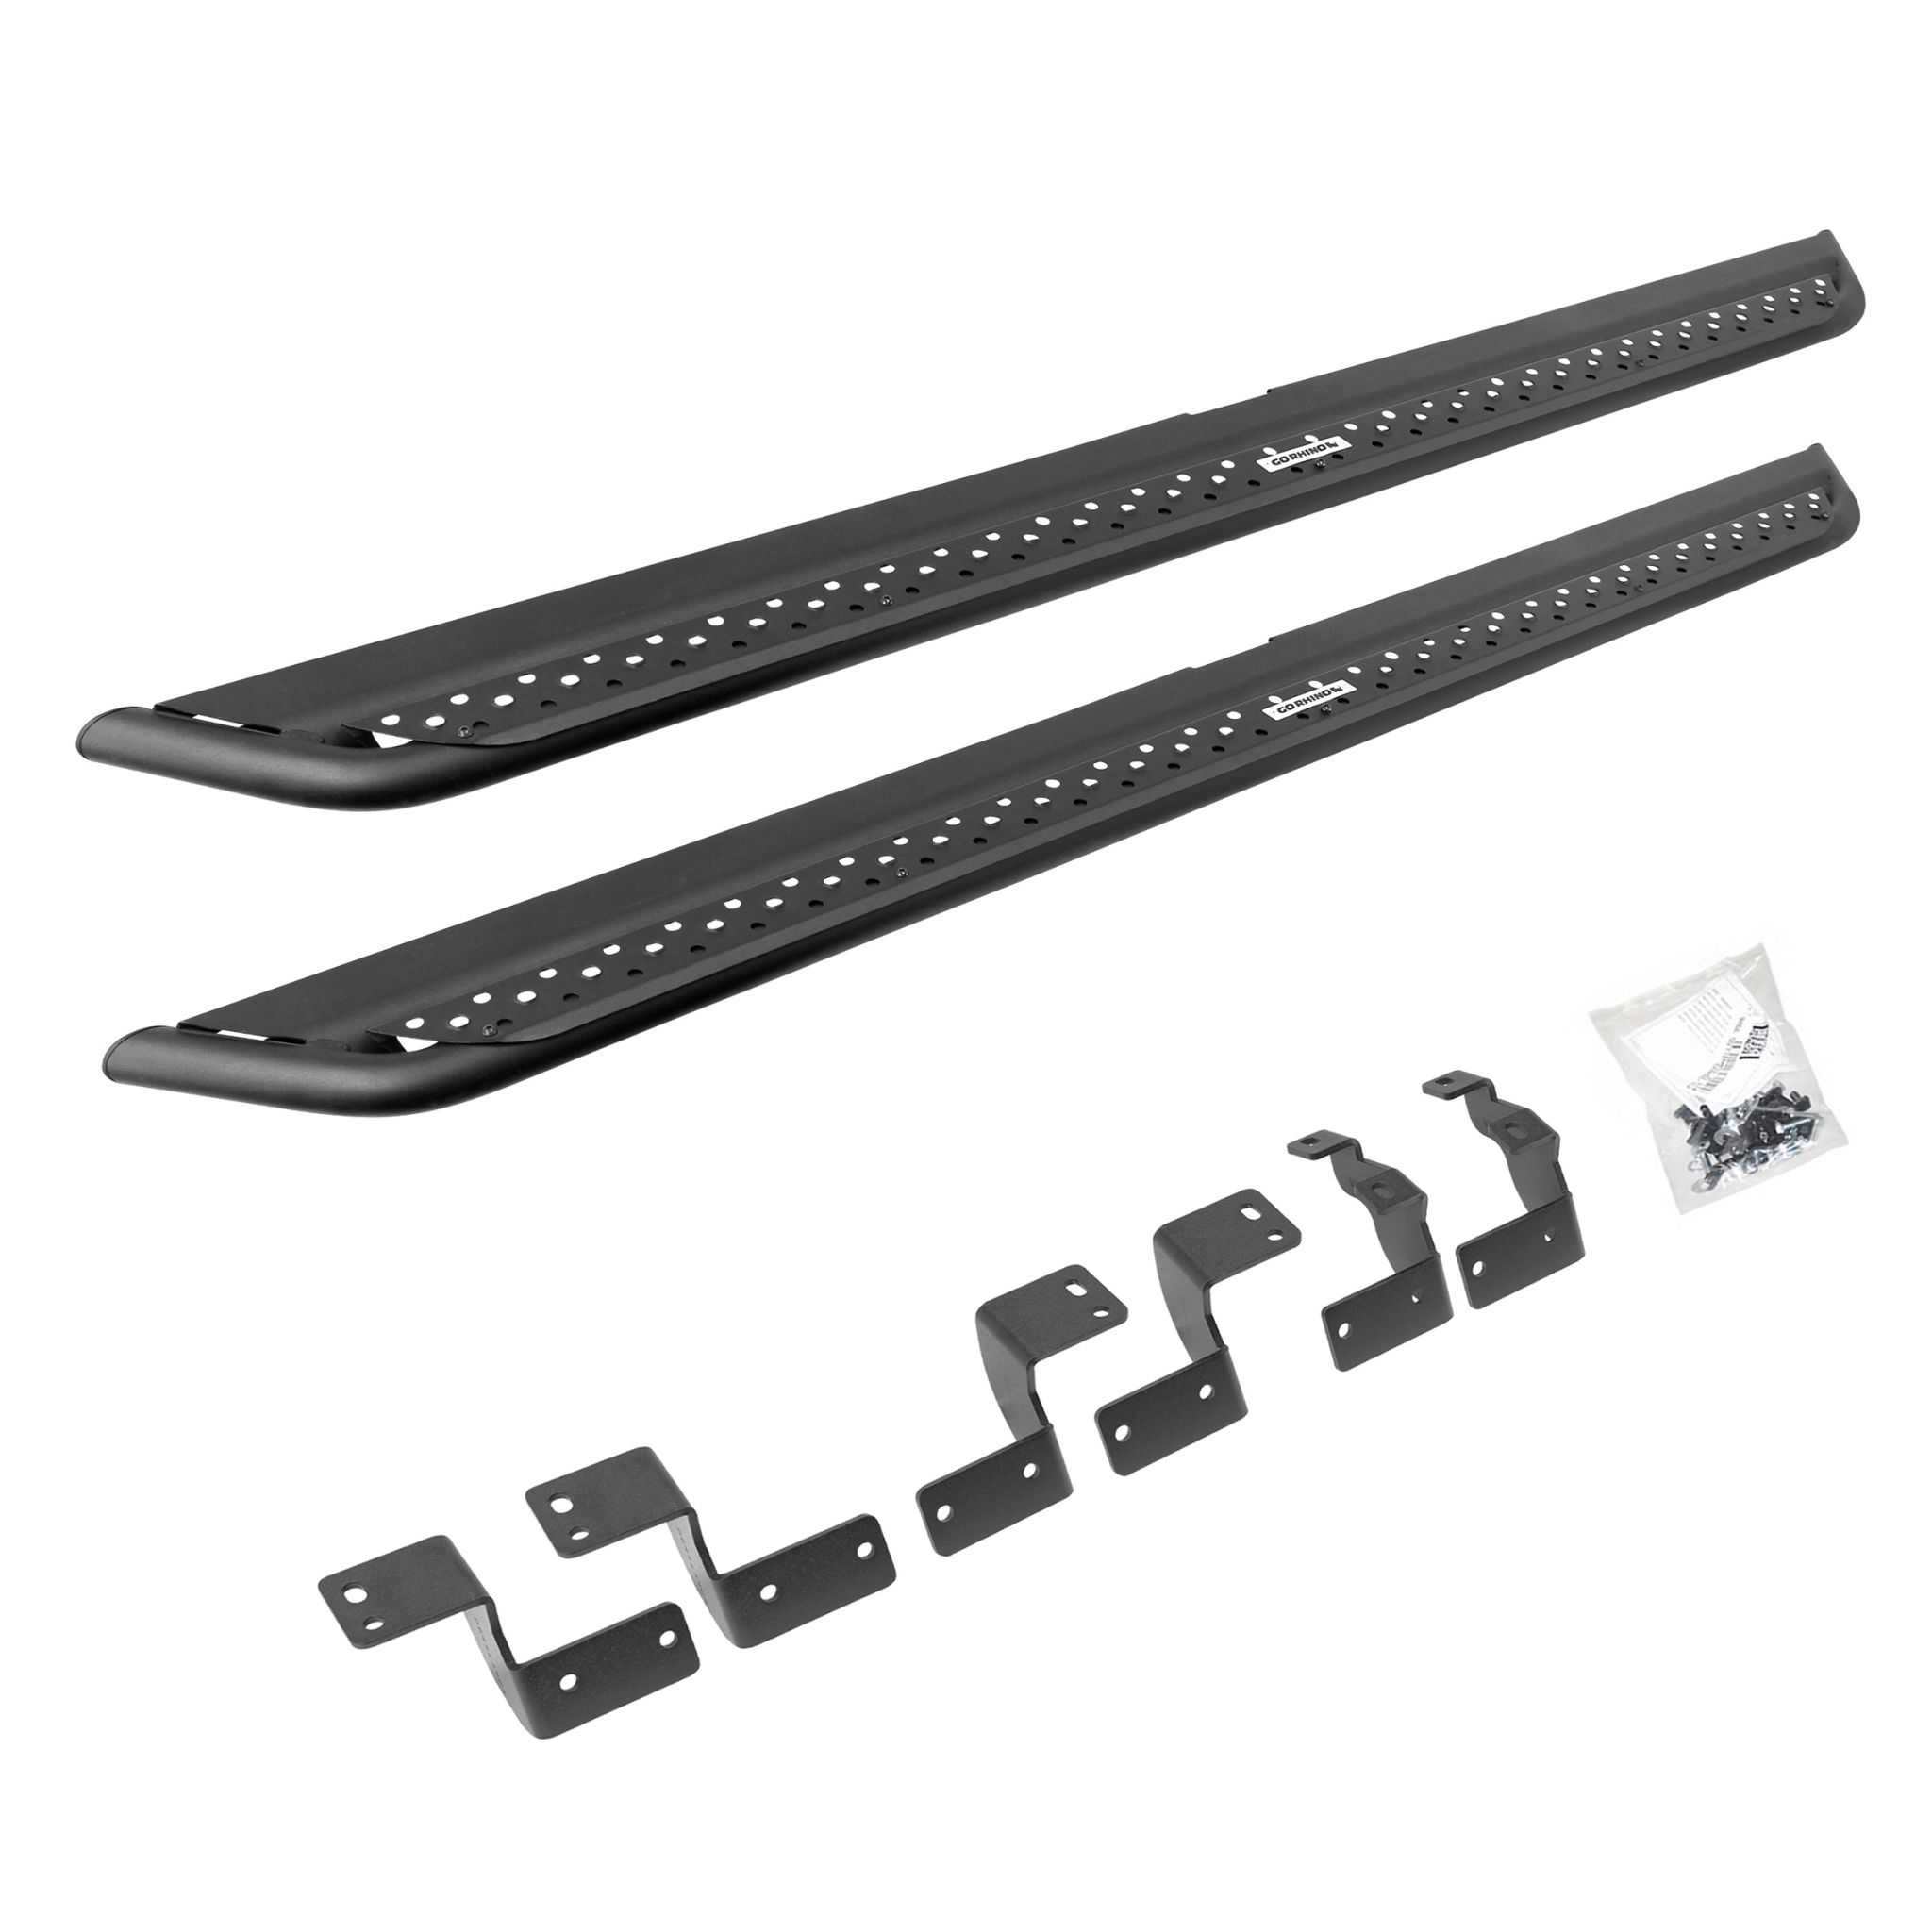 Go Rhino DSS4425T - Dominator Xtreme DSS SideSteps With Mounting Bracket Kit - Textured Black